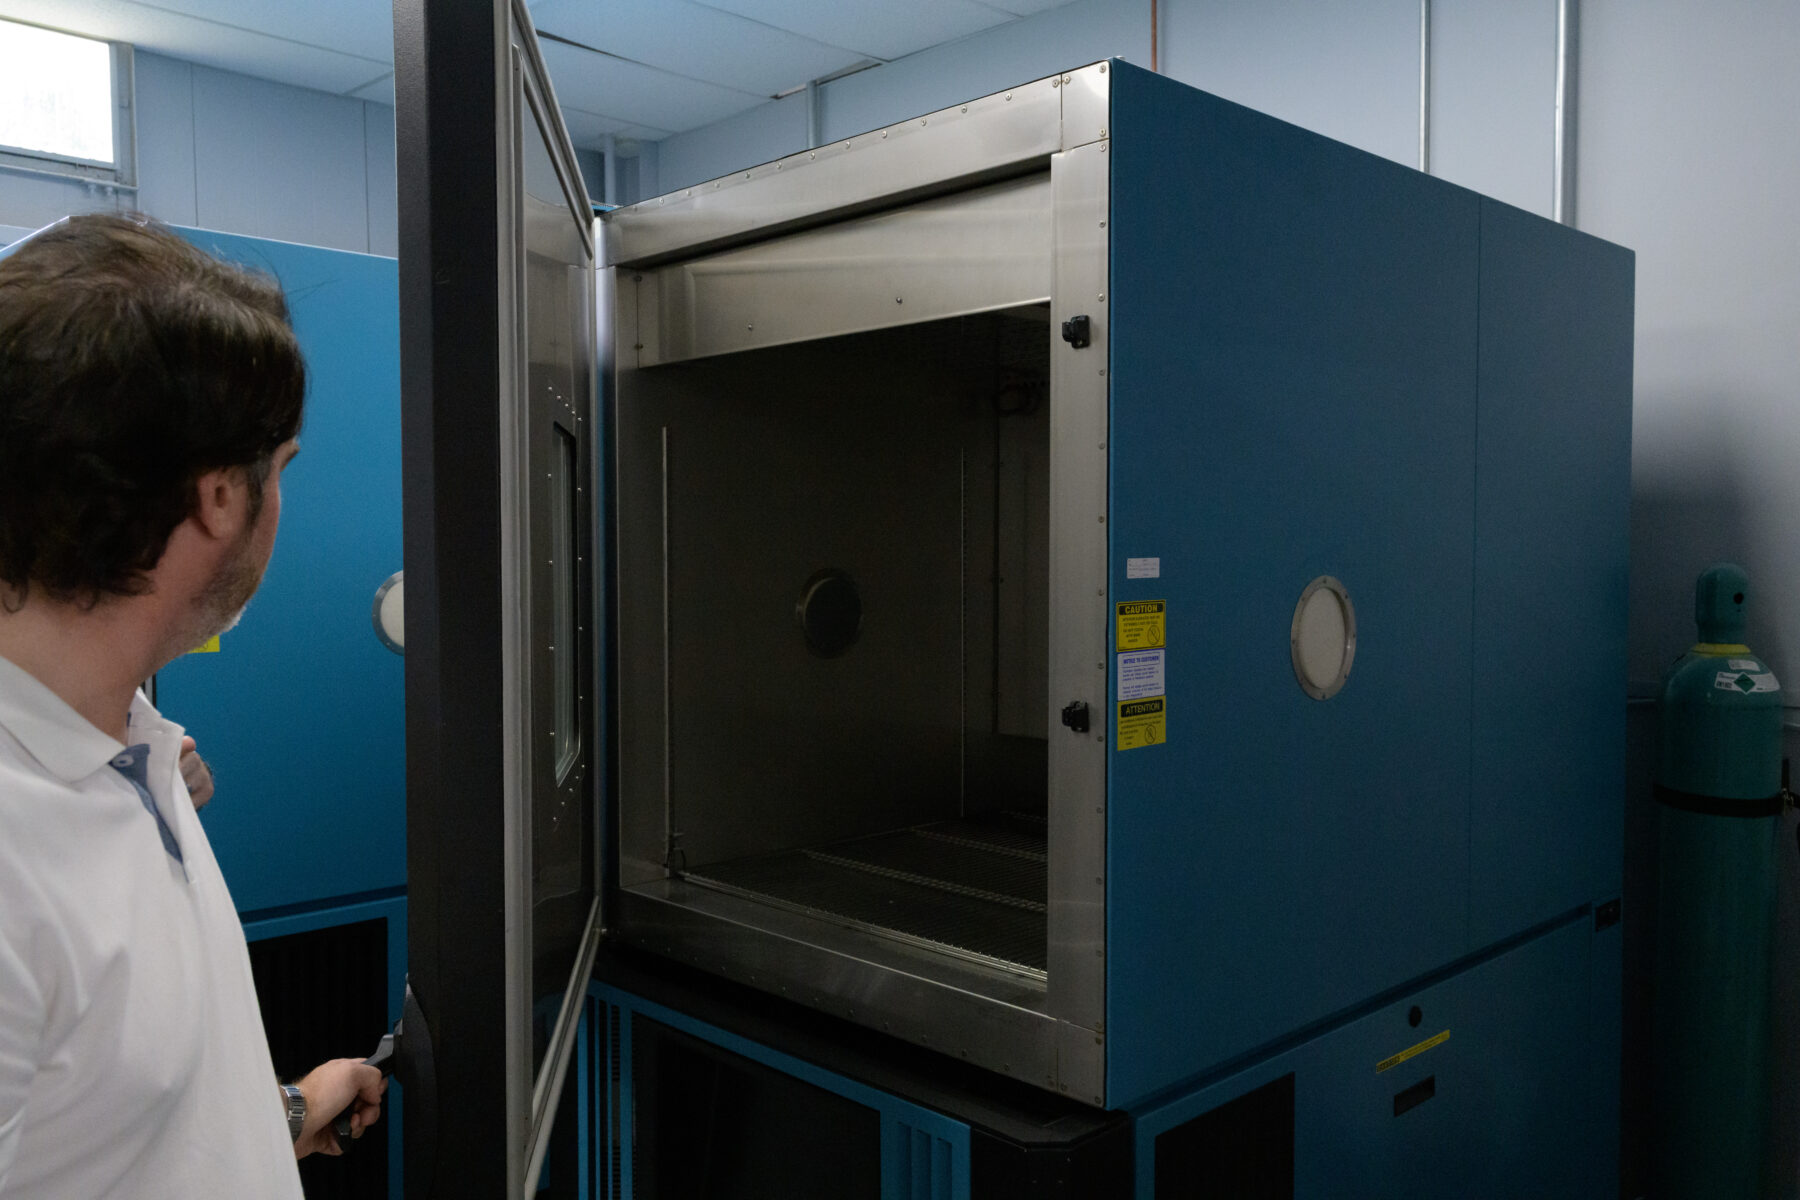 A scientist at RJ Lee Group opens the door to a Thermotron aging chamber.